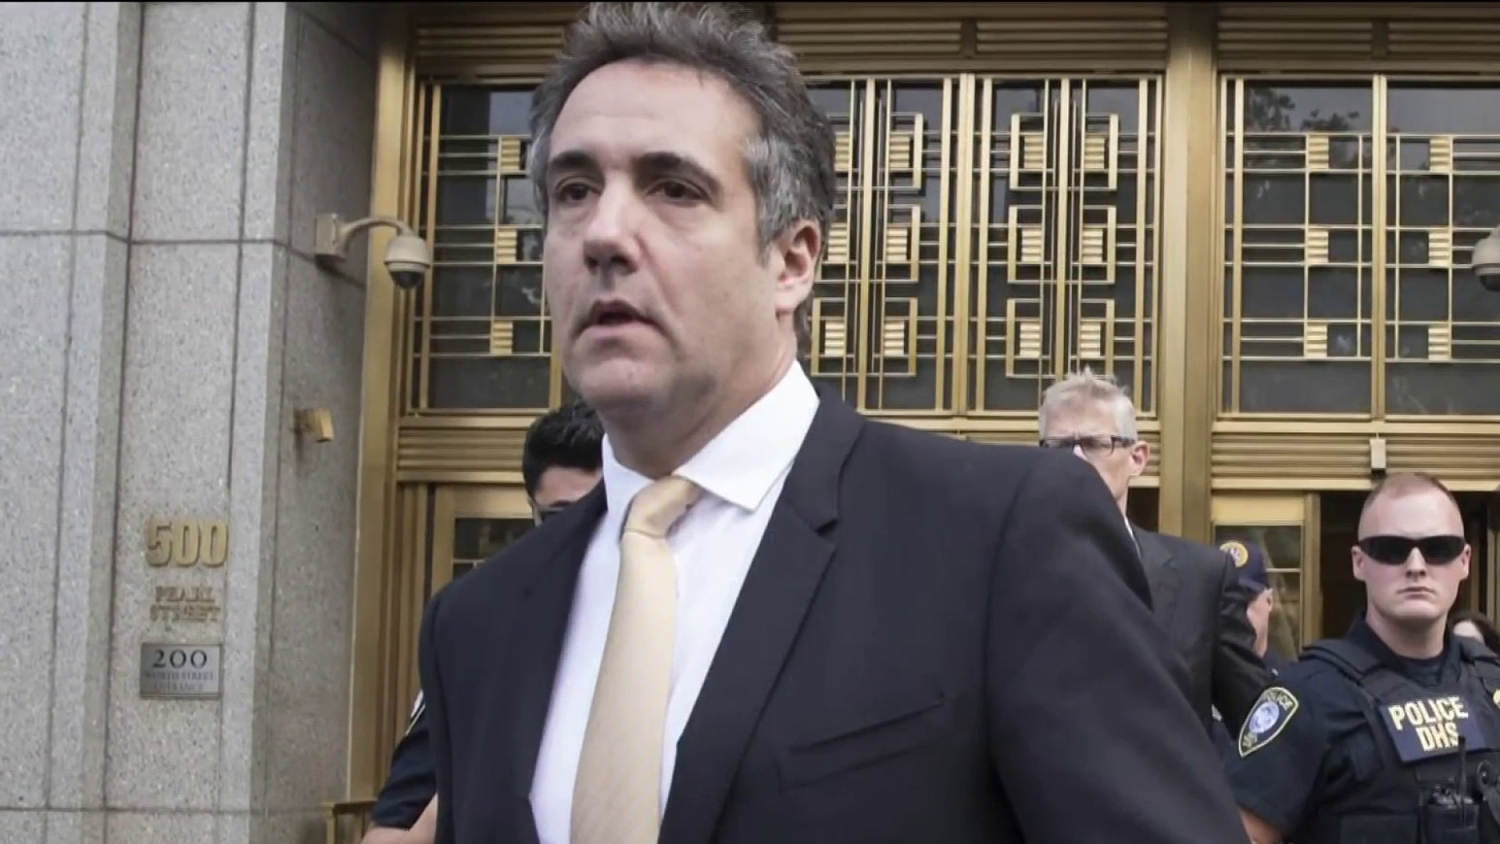 Michael Cohen testifies that Trump directed him to handle the Stormy Daniels story